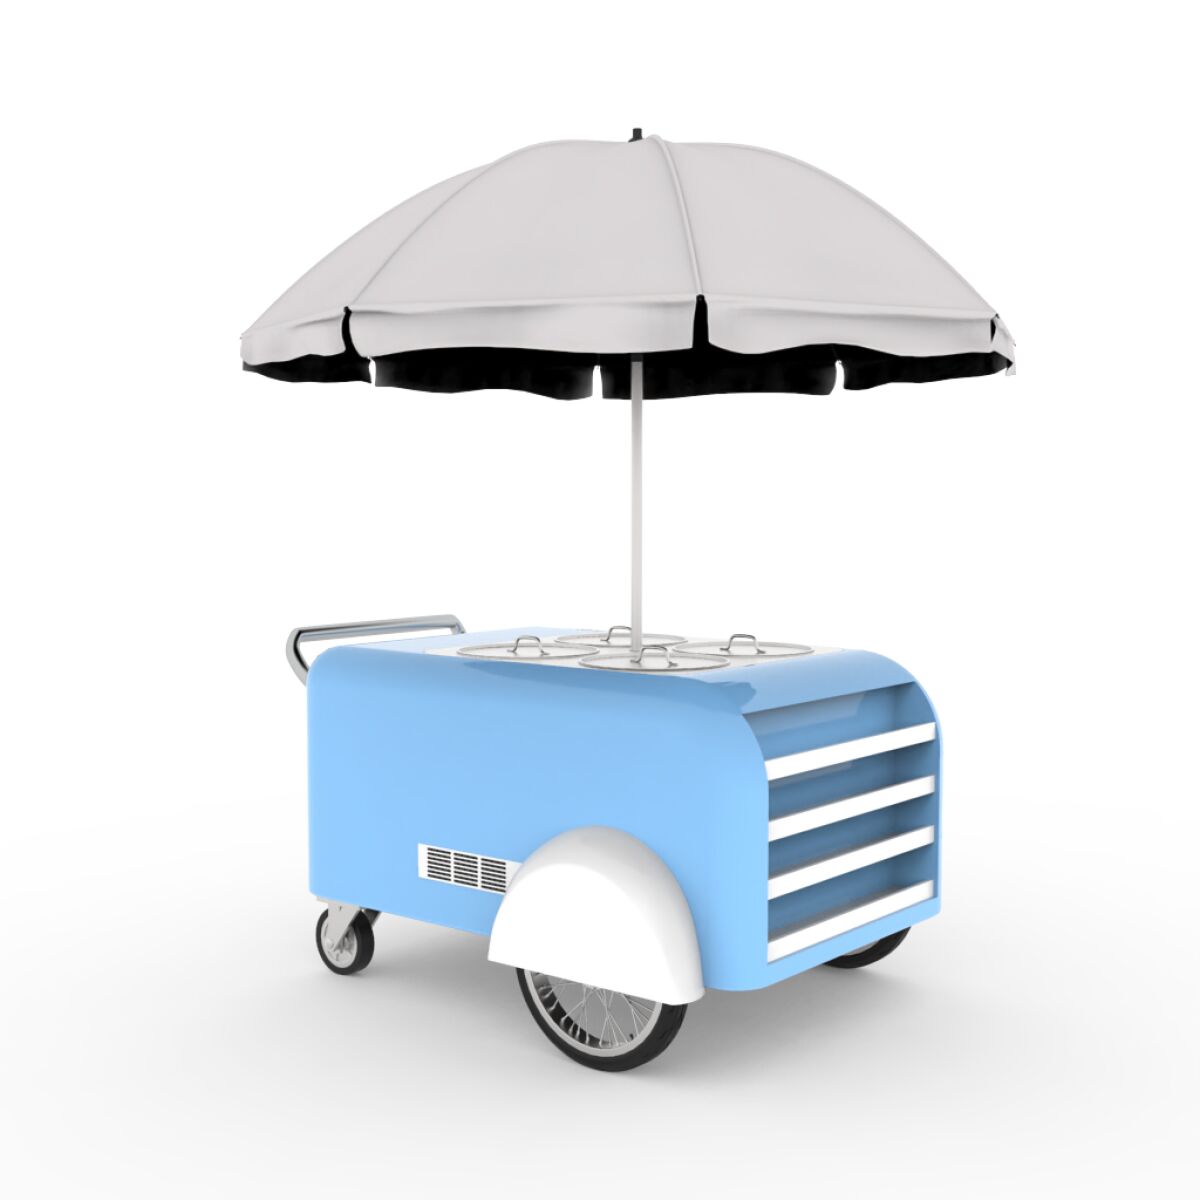 A curving, baby blue tamale vending cart features four steam containers and an umbrella.